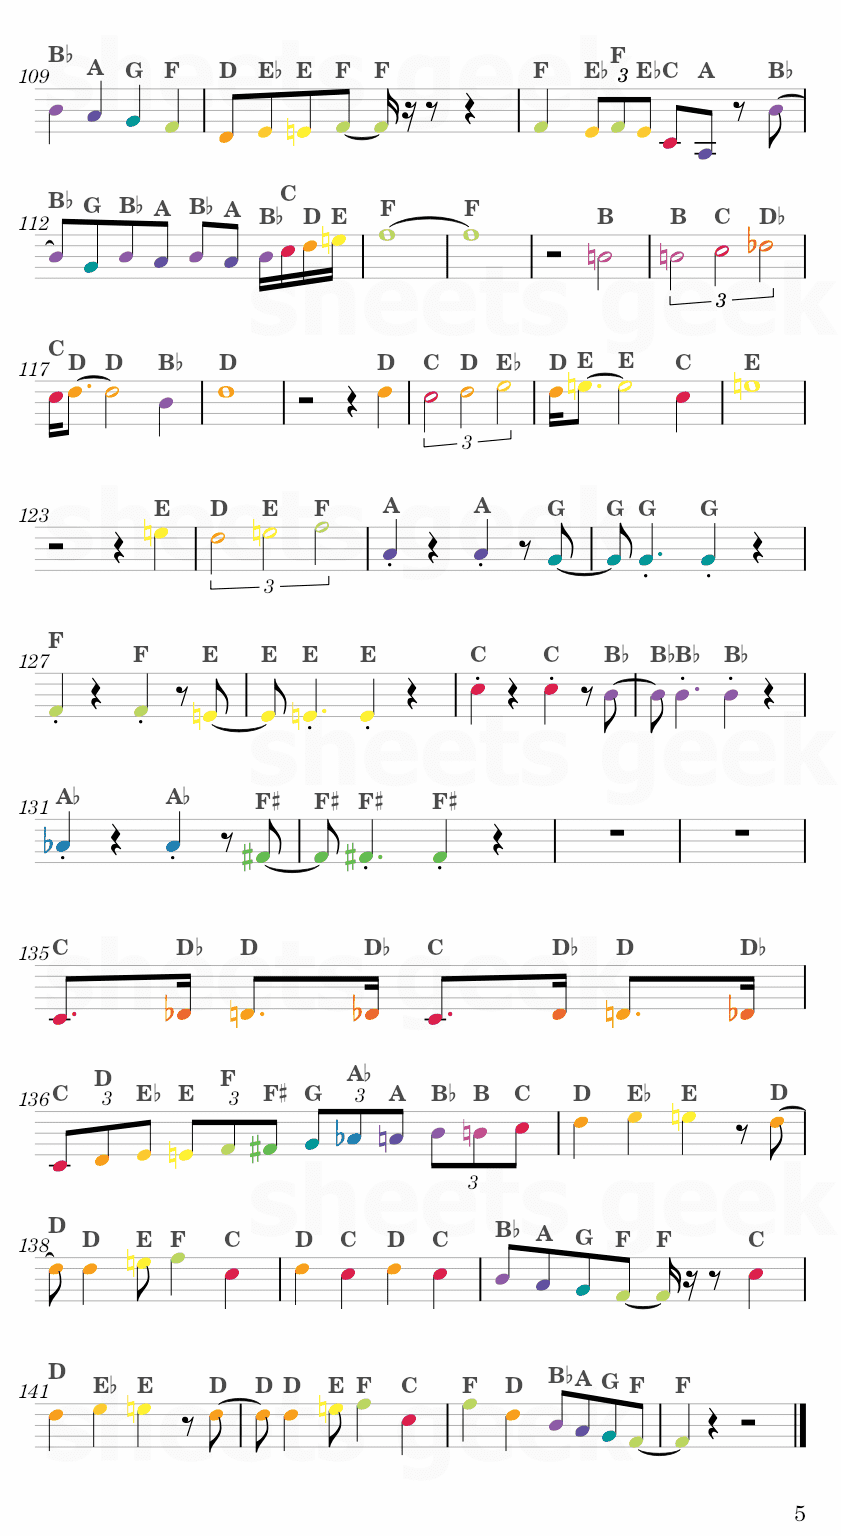 Coconut Mall - Mario Kart Wii Easy Sheet Music Free for piano, keyboard, flute, violin, sax, cello page 5